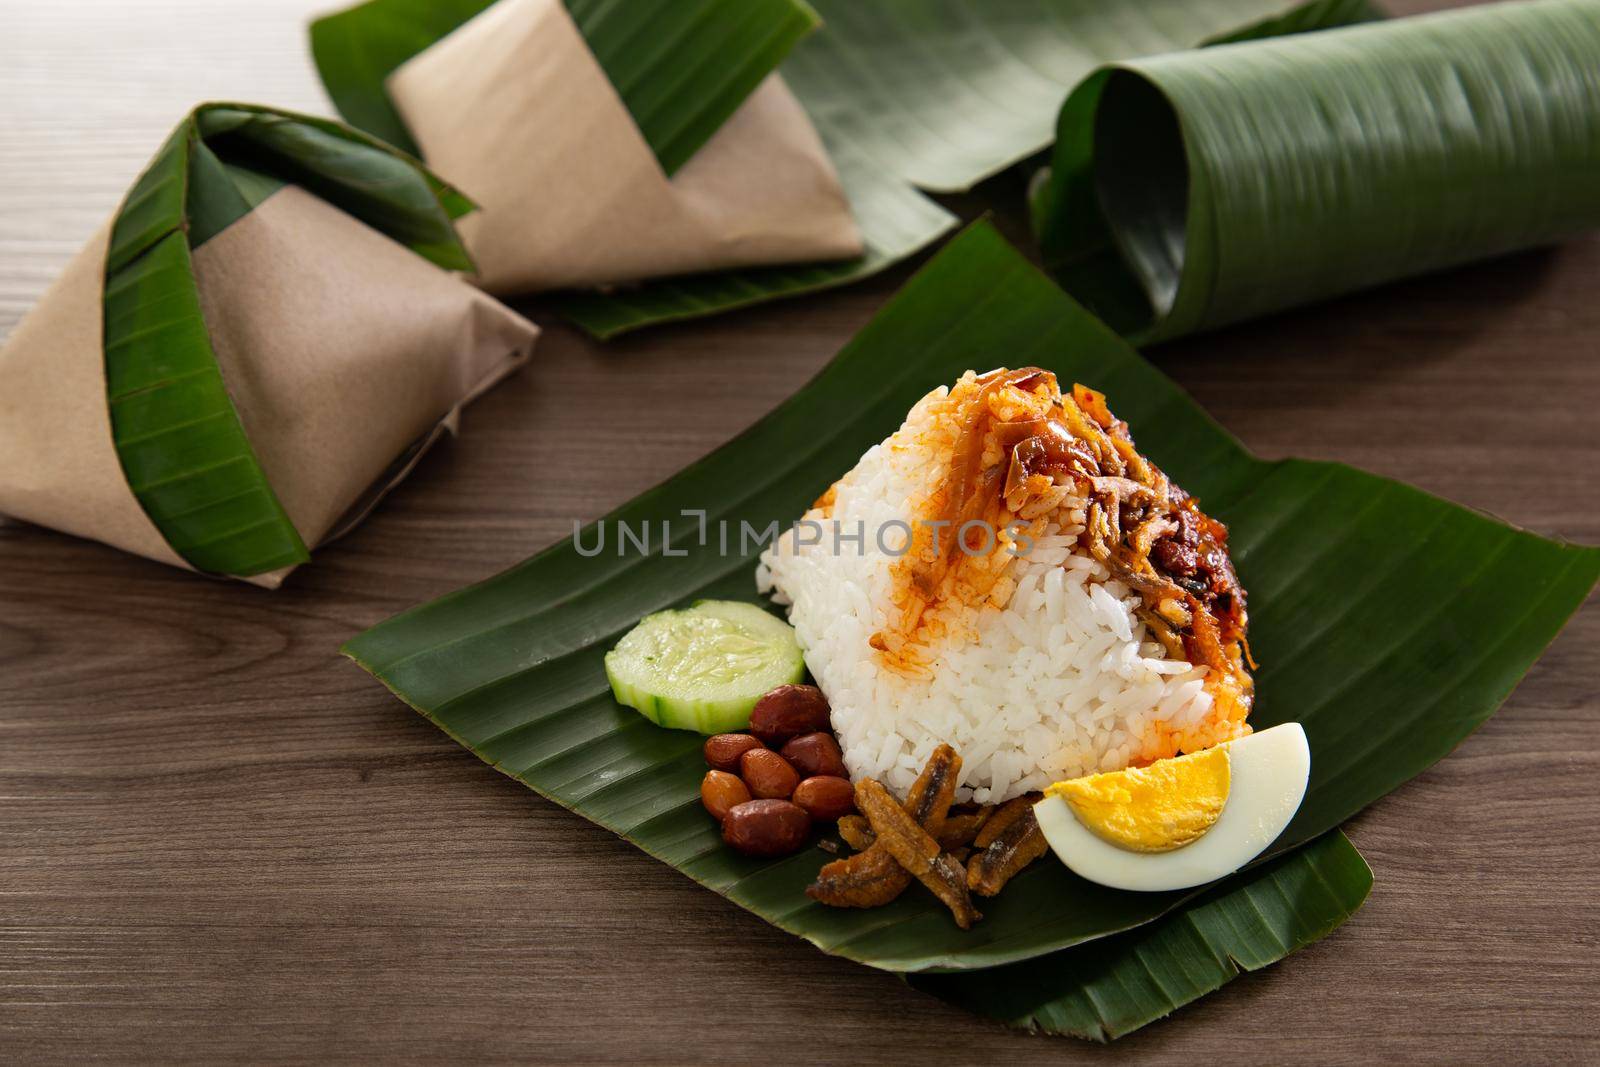 Nasi lemak pack in banana leaf, popular breakfast in Malaysia by tehcheesiong